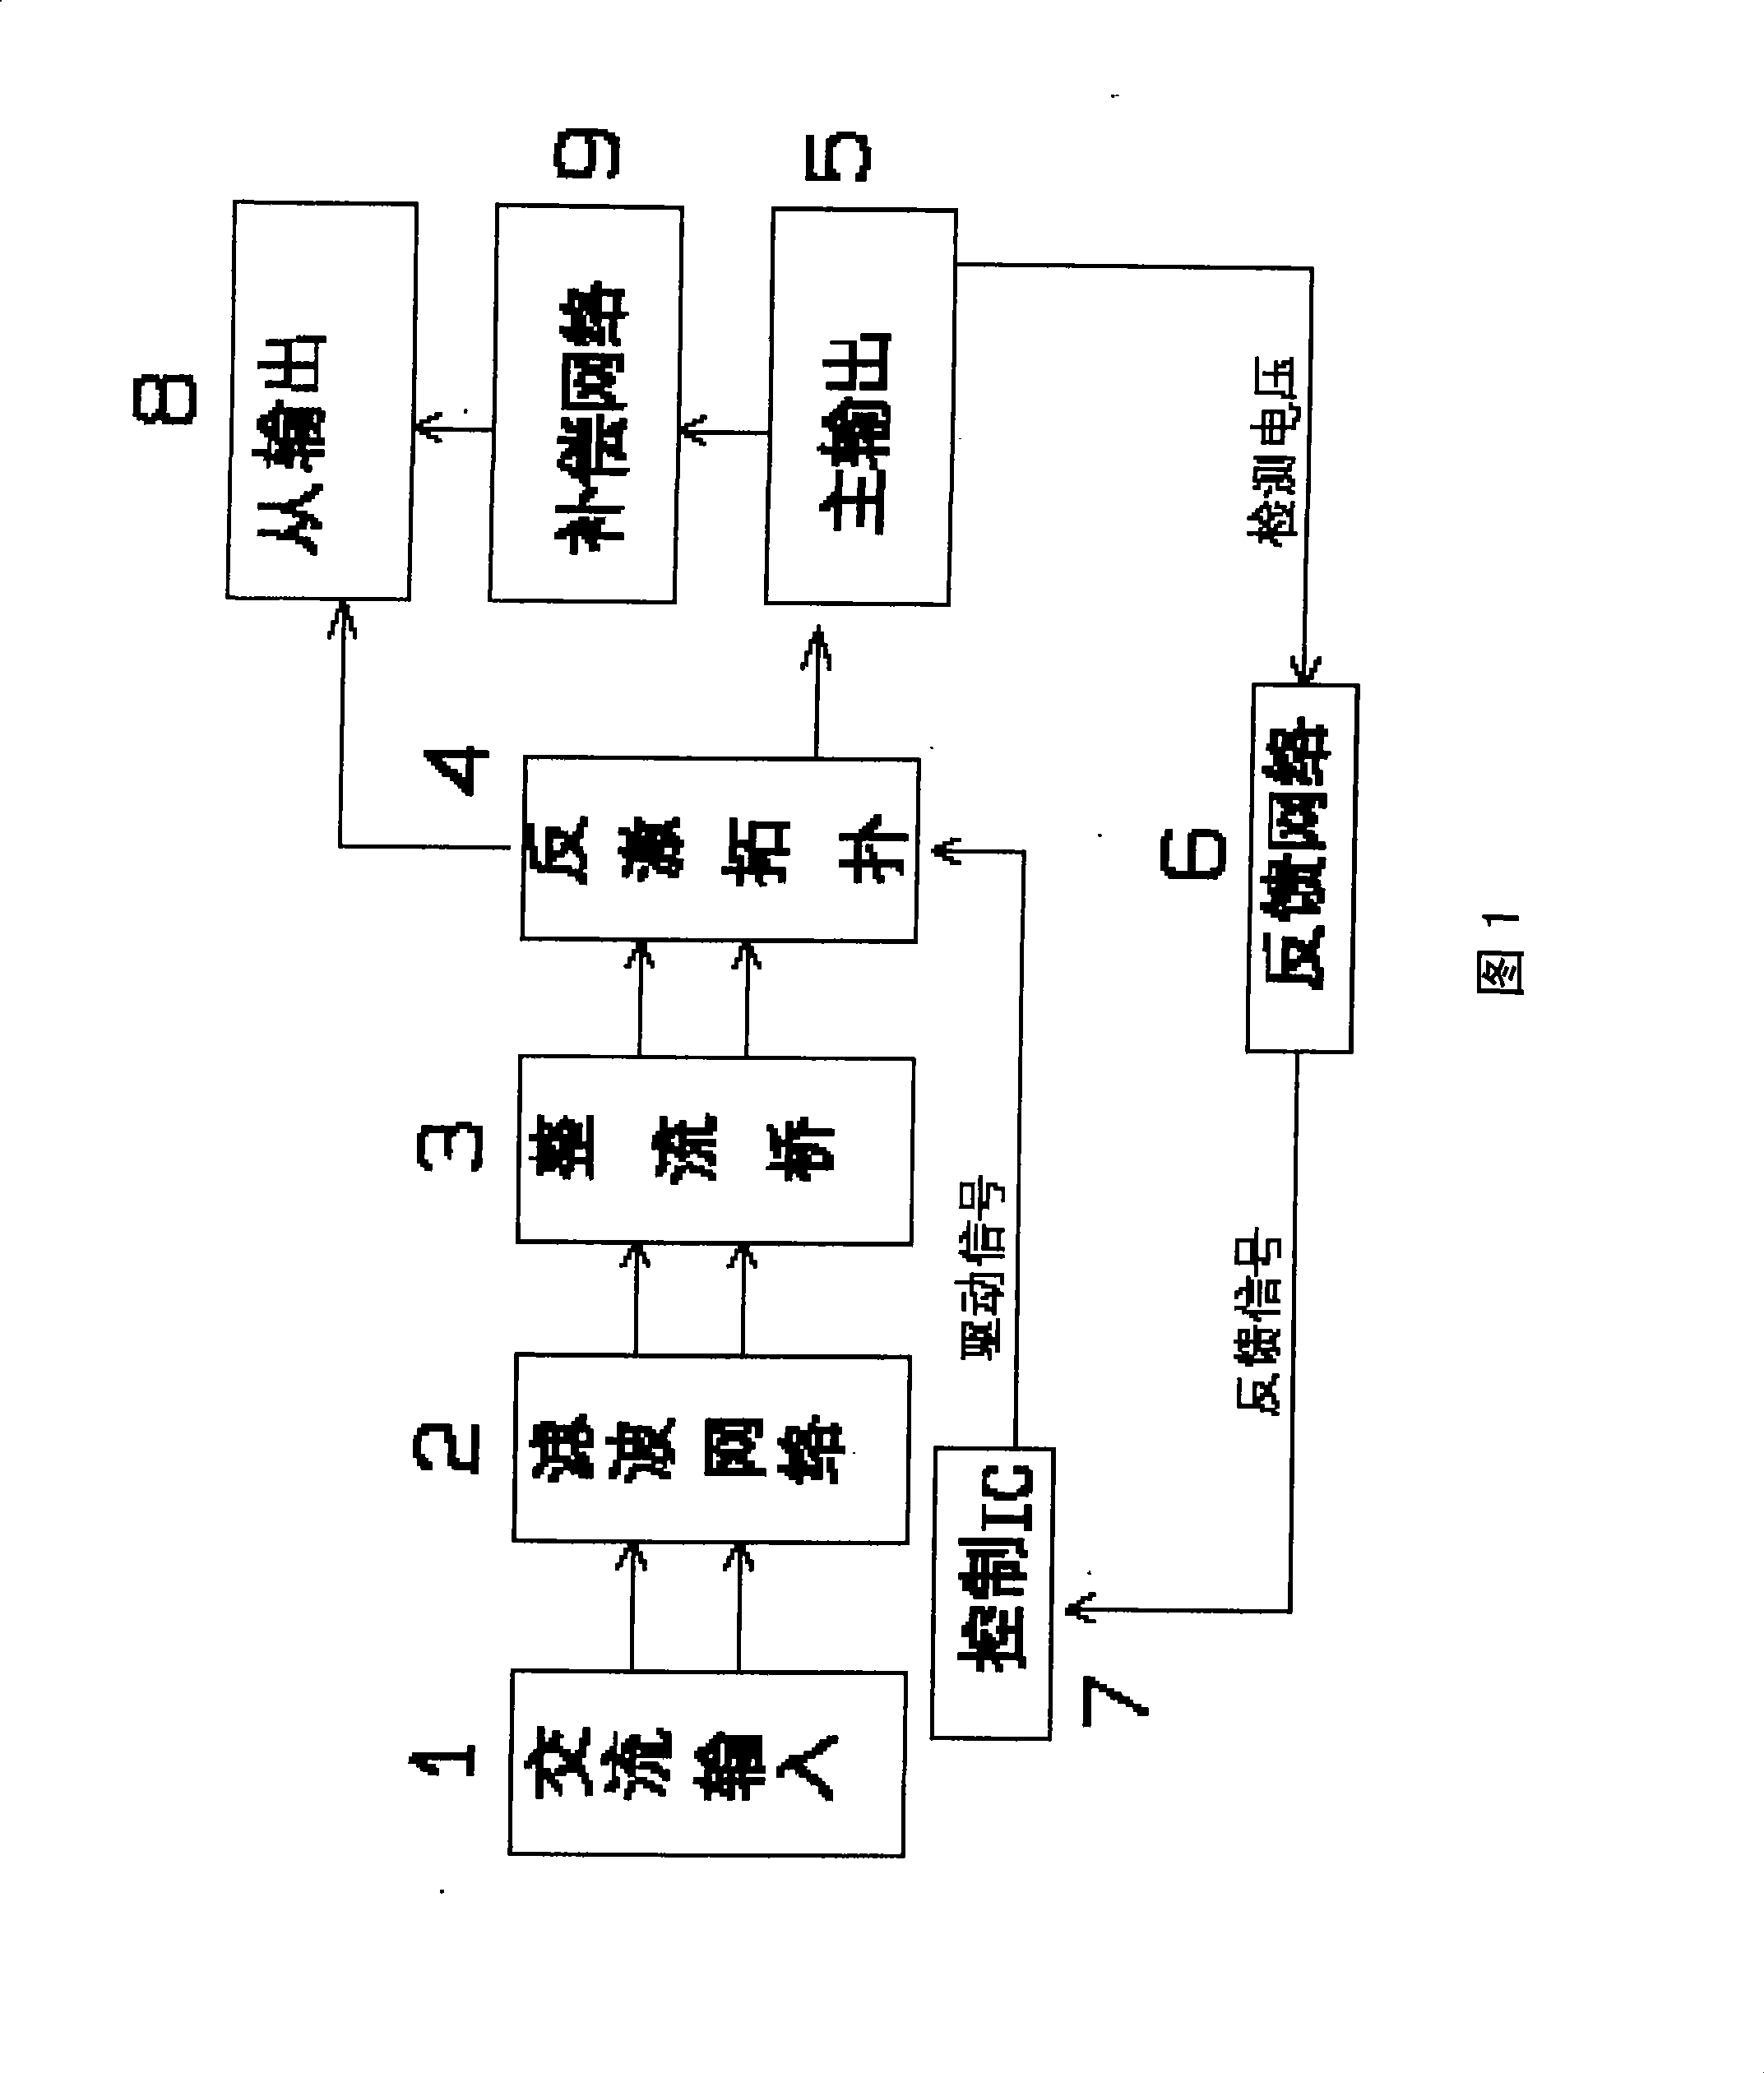 Single chip controlled power supply apparatus